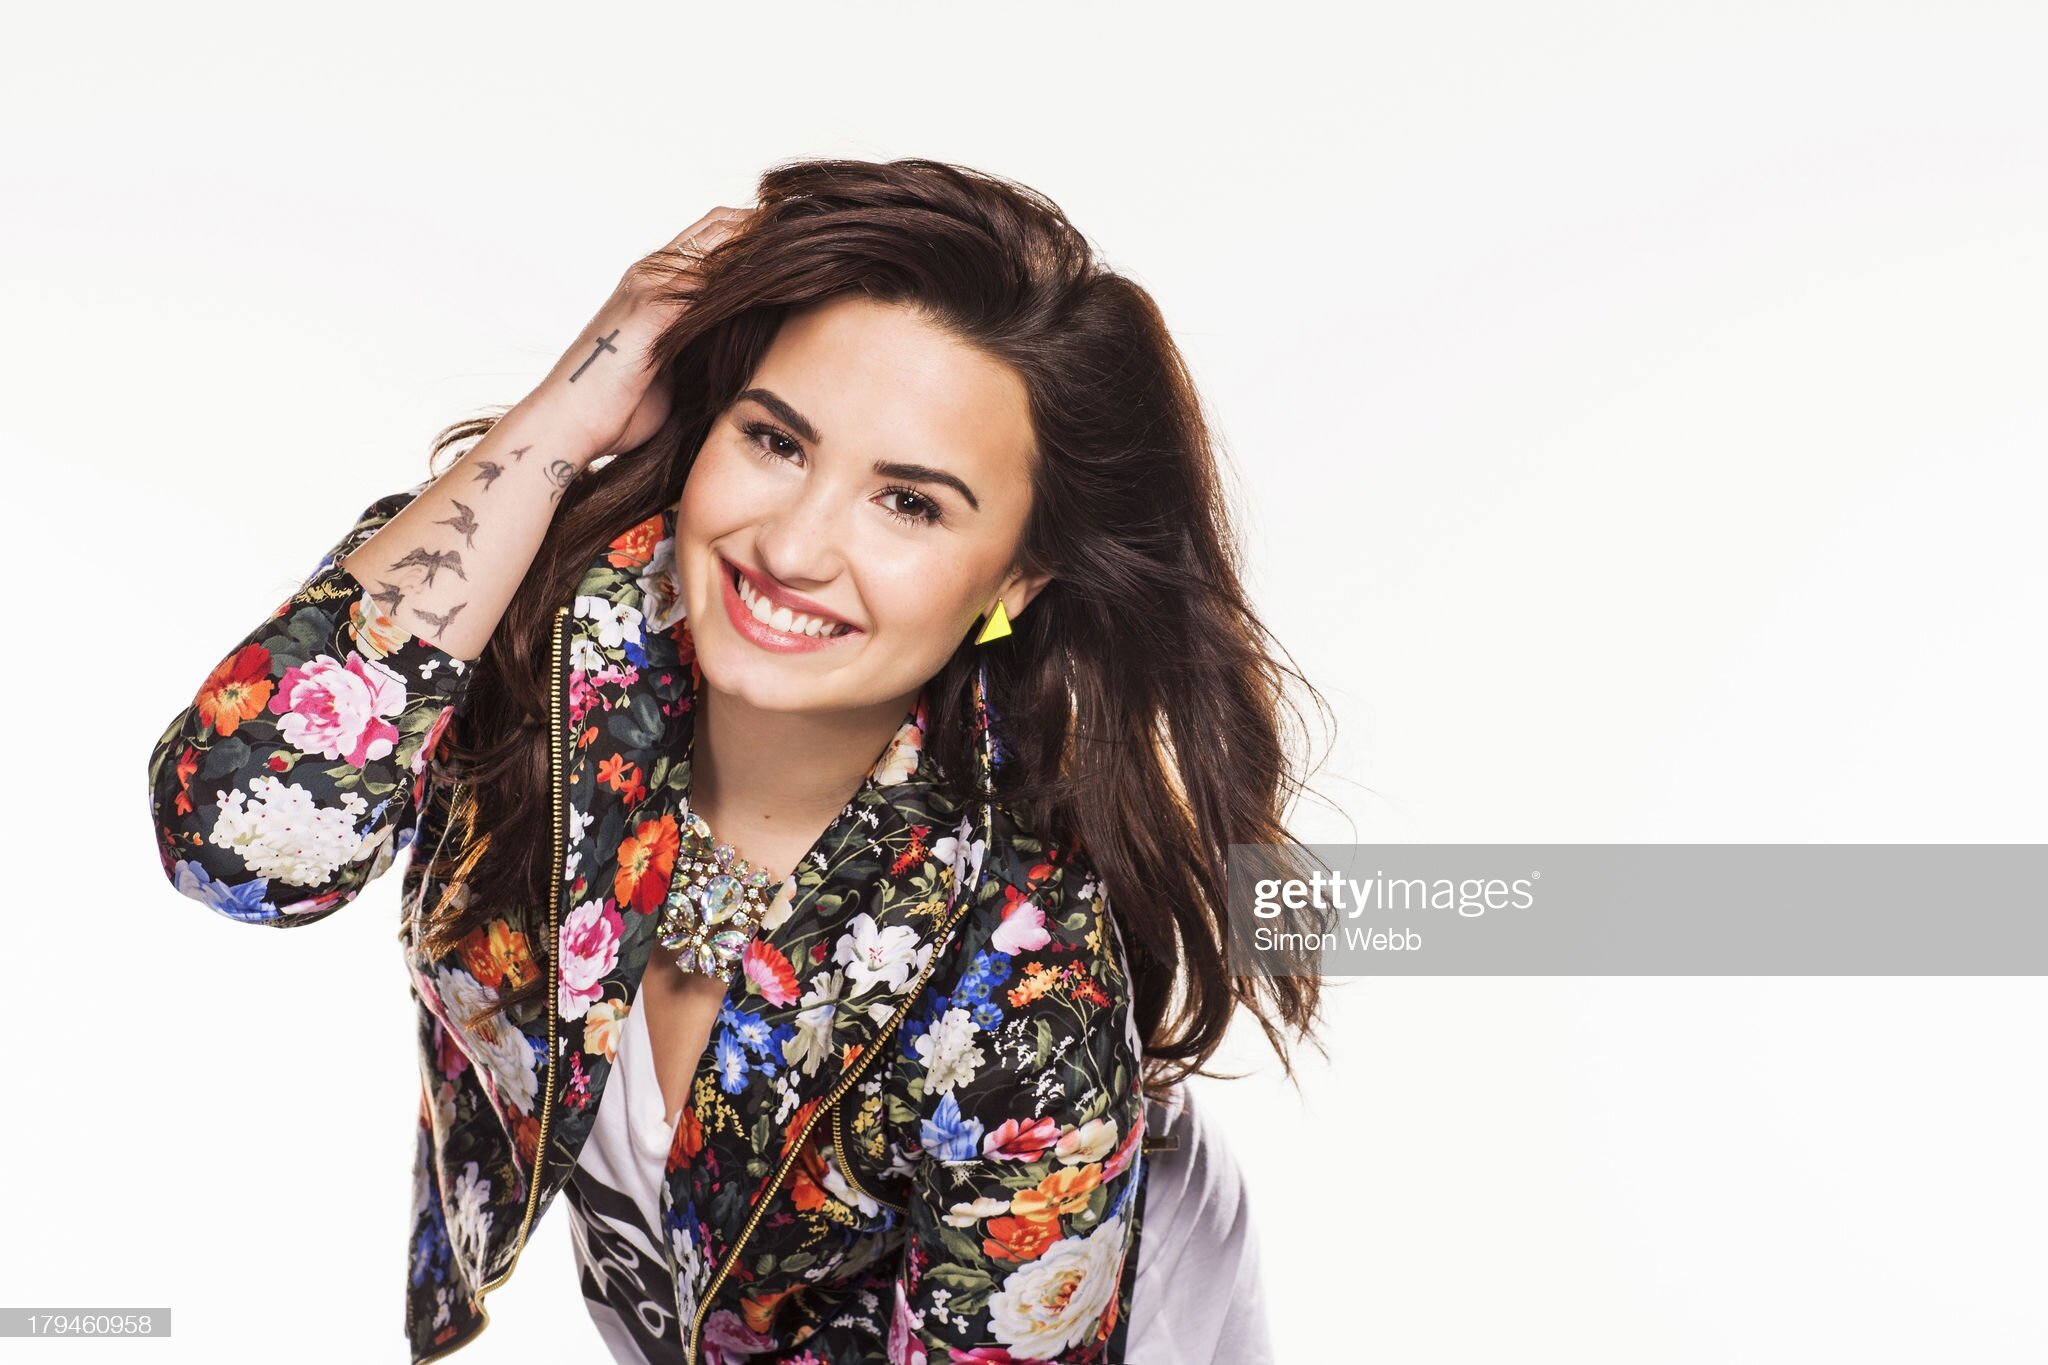 singer-songwriter-musician-and-actor-demi-lovato-is-photographed-for-picture-id179460958.jpg